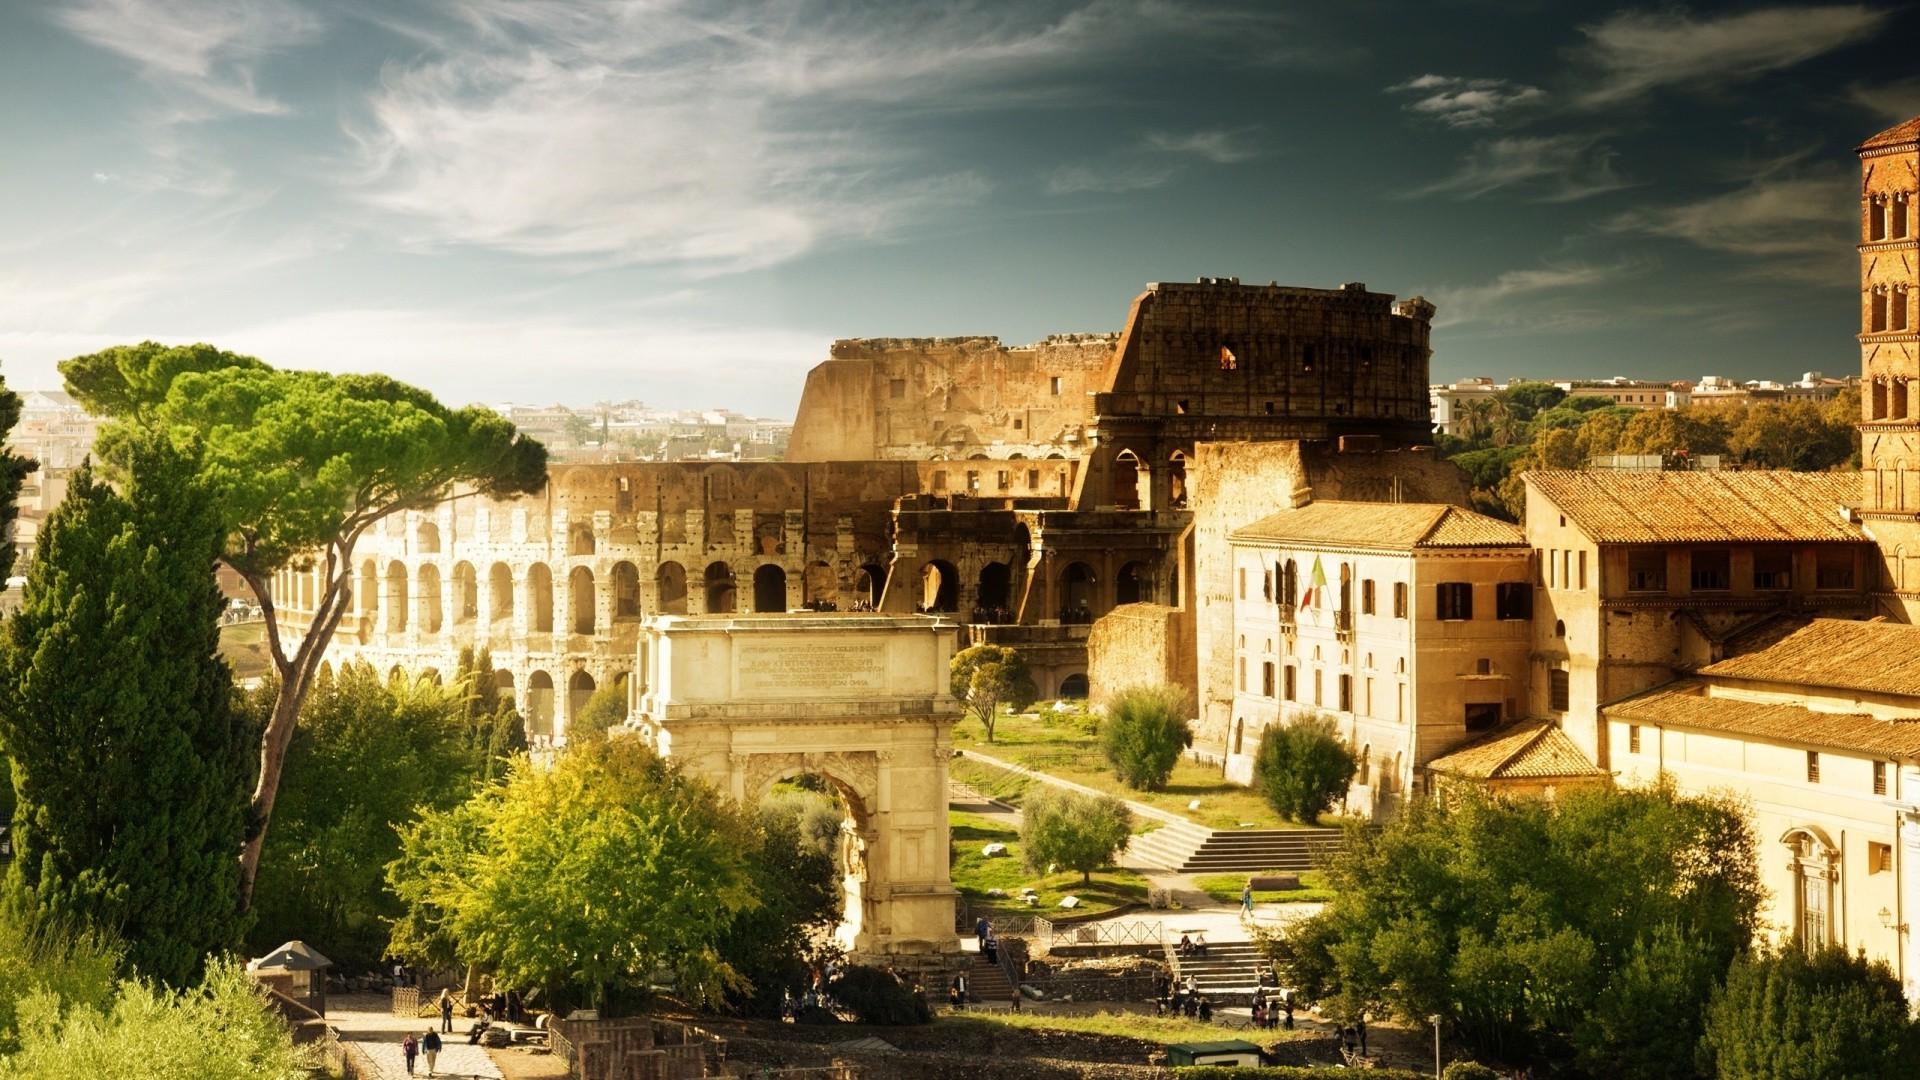 cityscape, Architecture, Rome, Italy, Old building, Trees, Ruin, Clouds, Colosseum Wallpaper